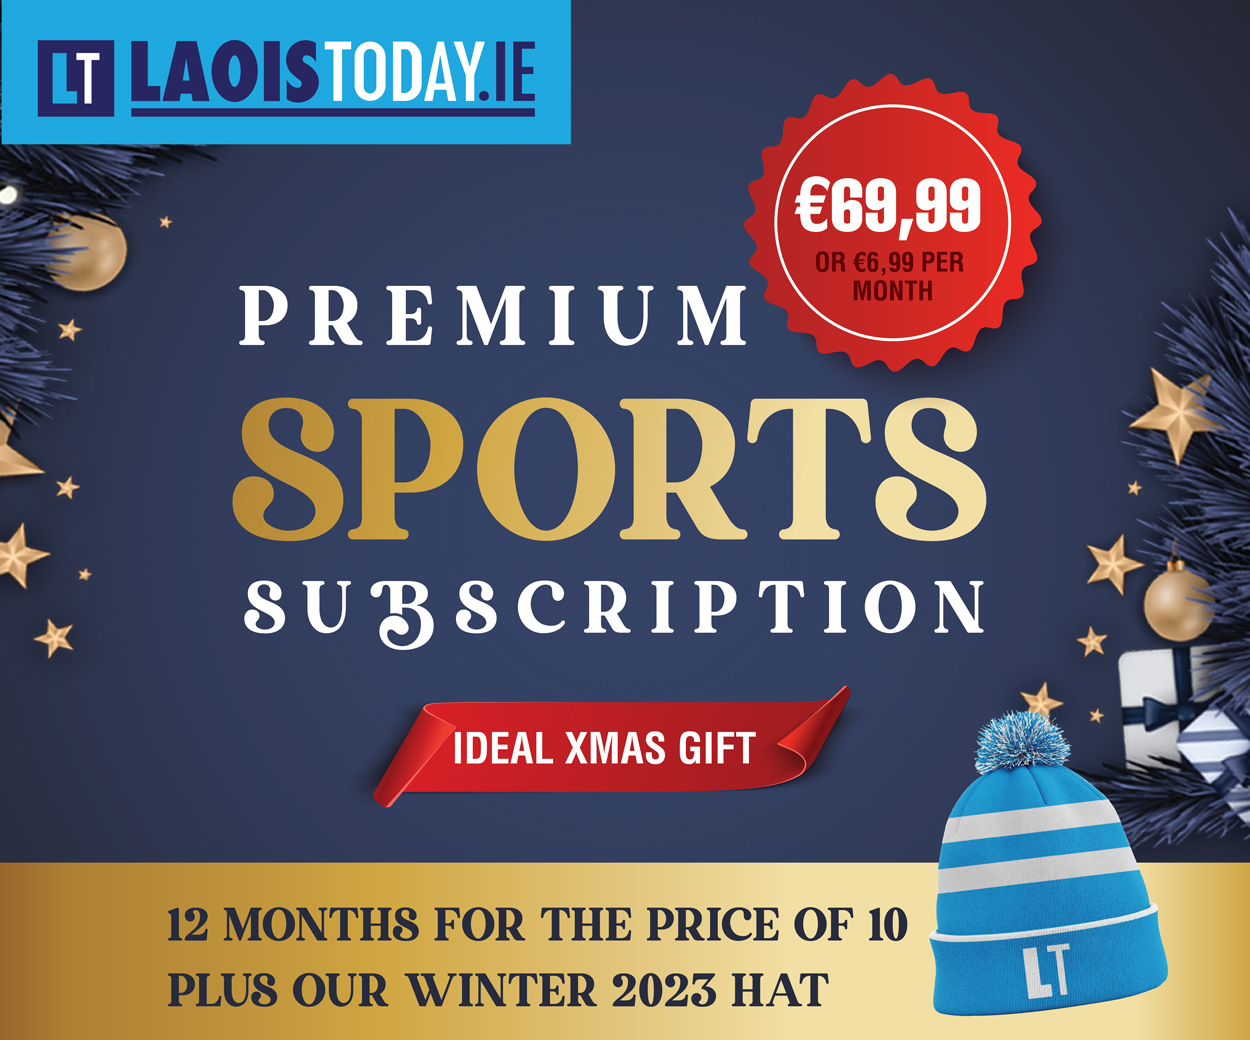 LaoisToday annual subscription special offer